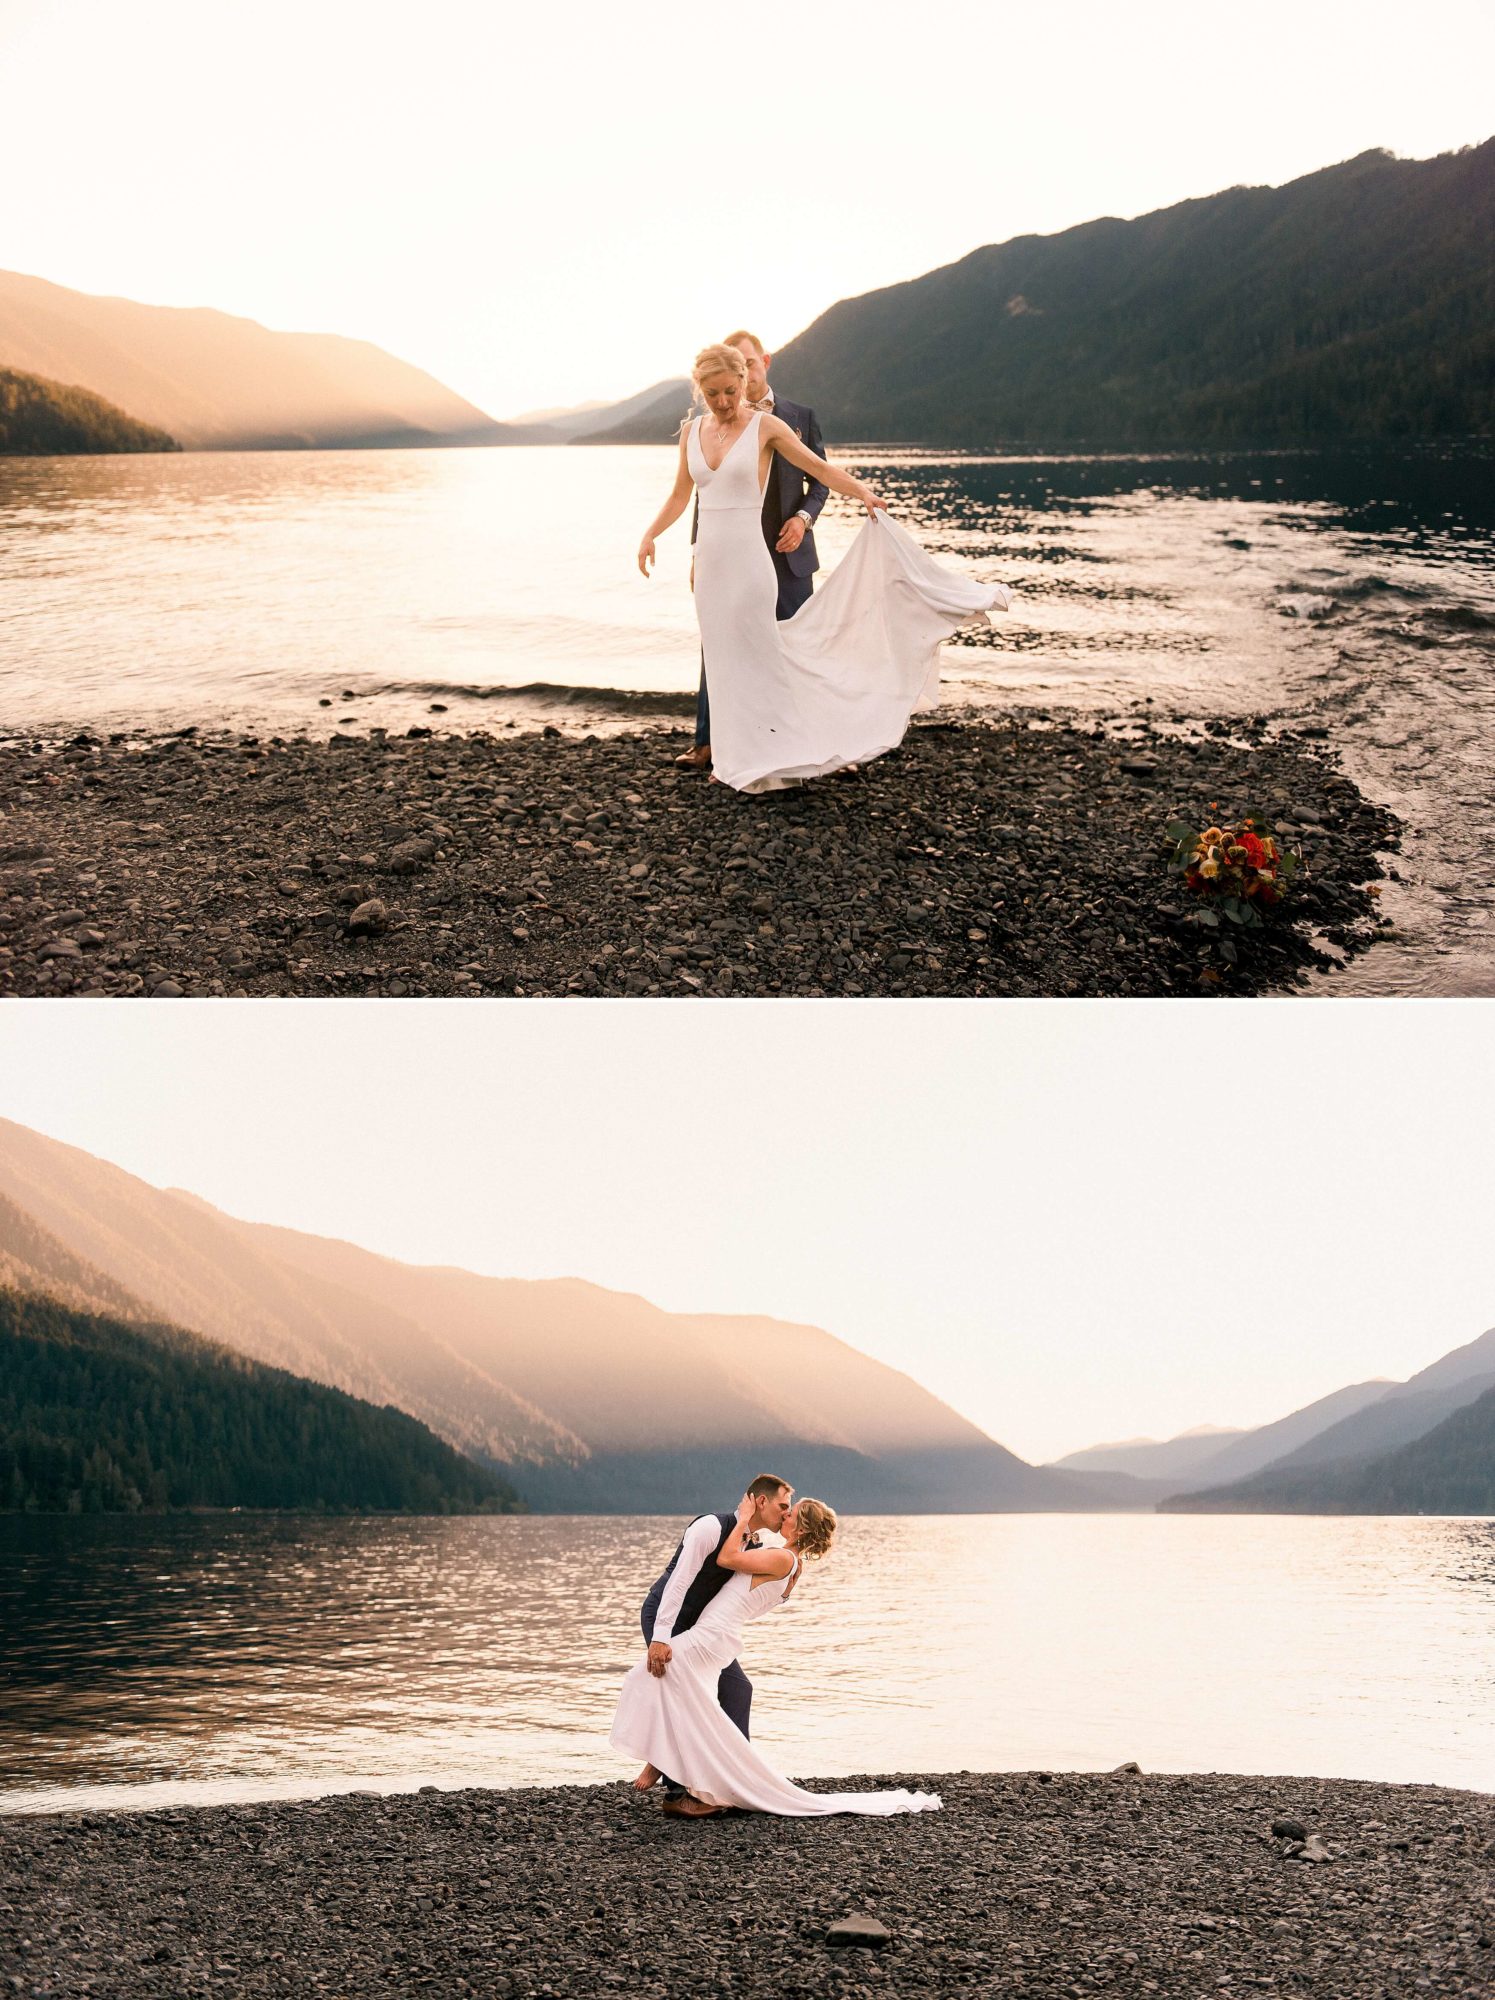 Bride and groom dancing and kissing lakeside with mountain backdrop